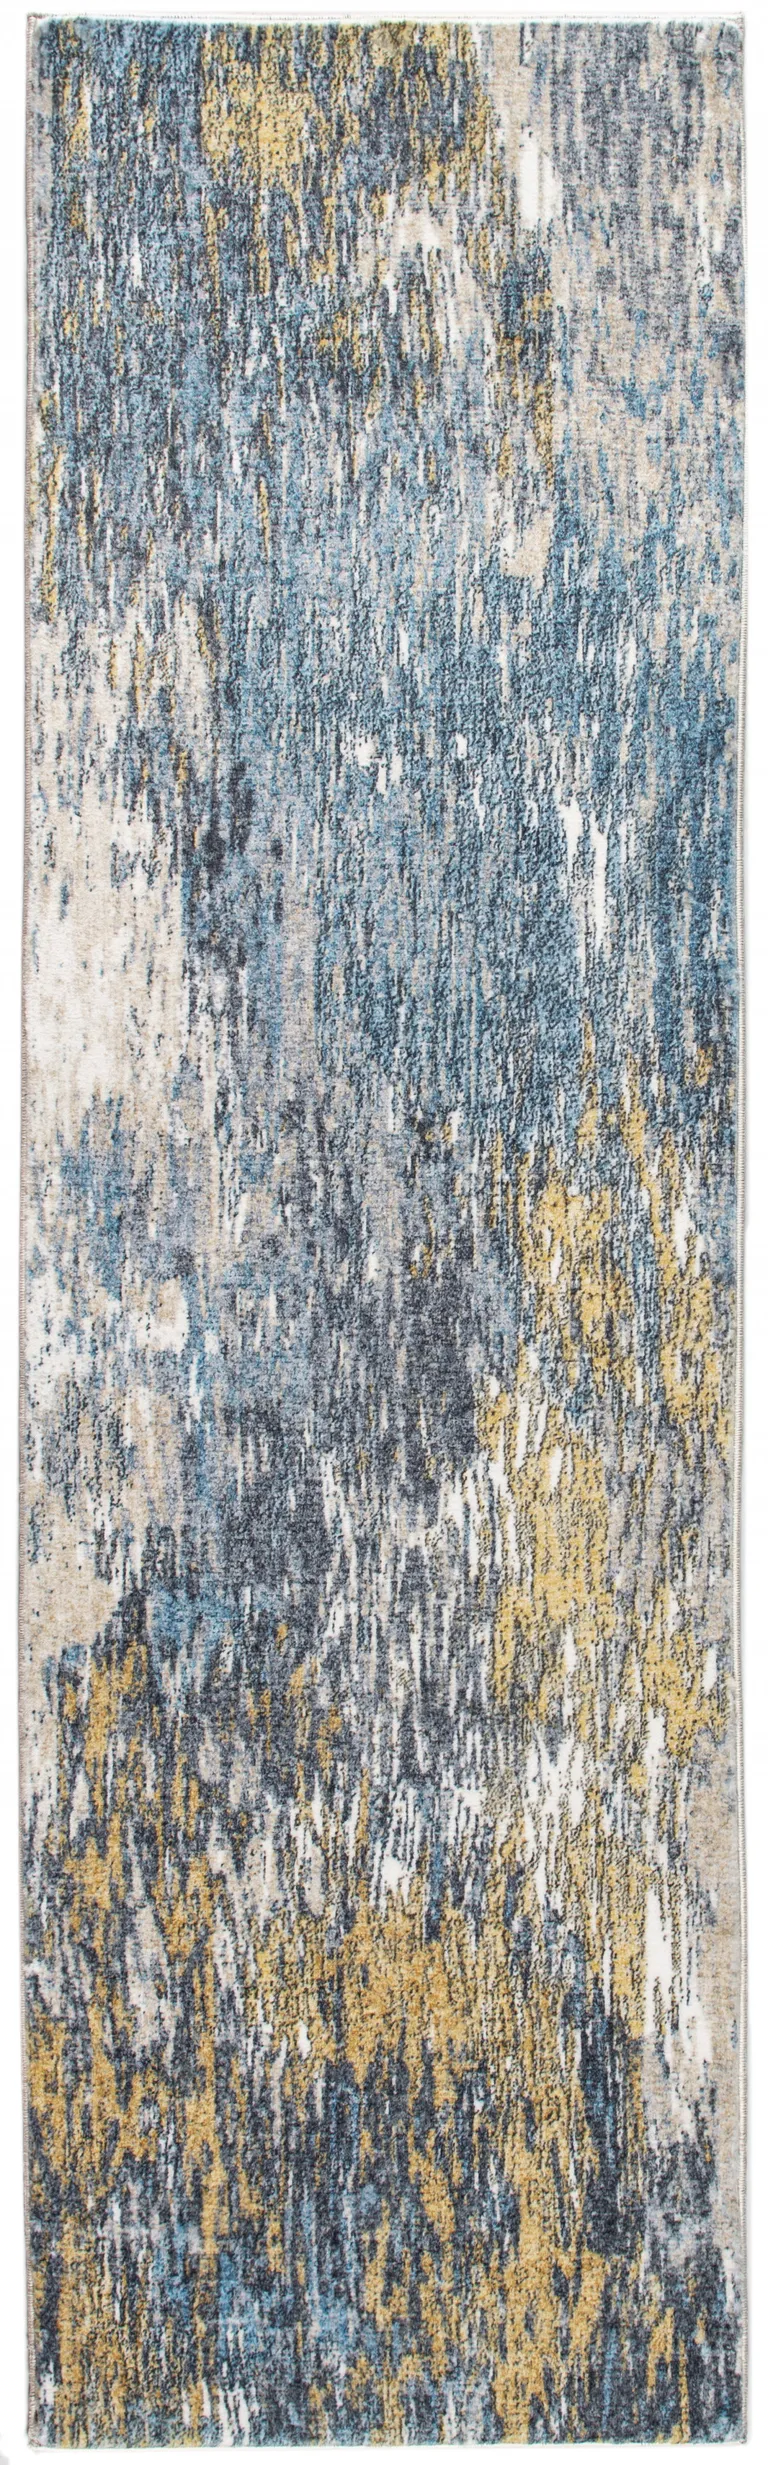 Blue Gold Abstract Painting Modern Area Rug Photo 4